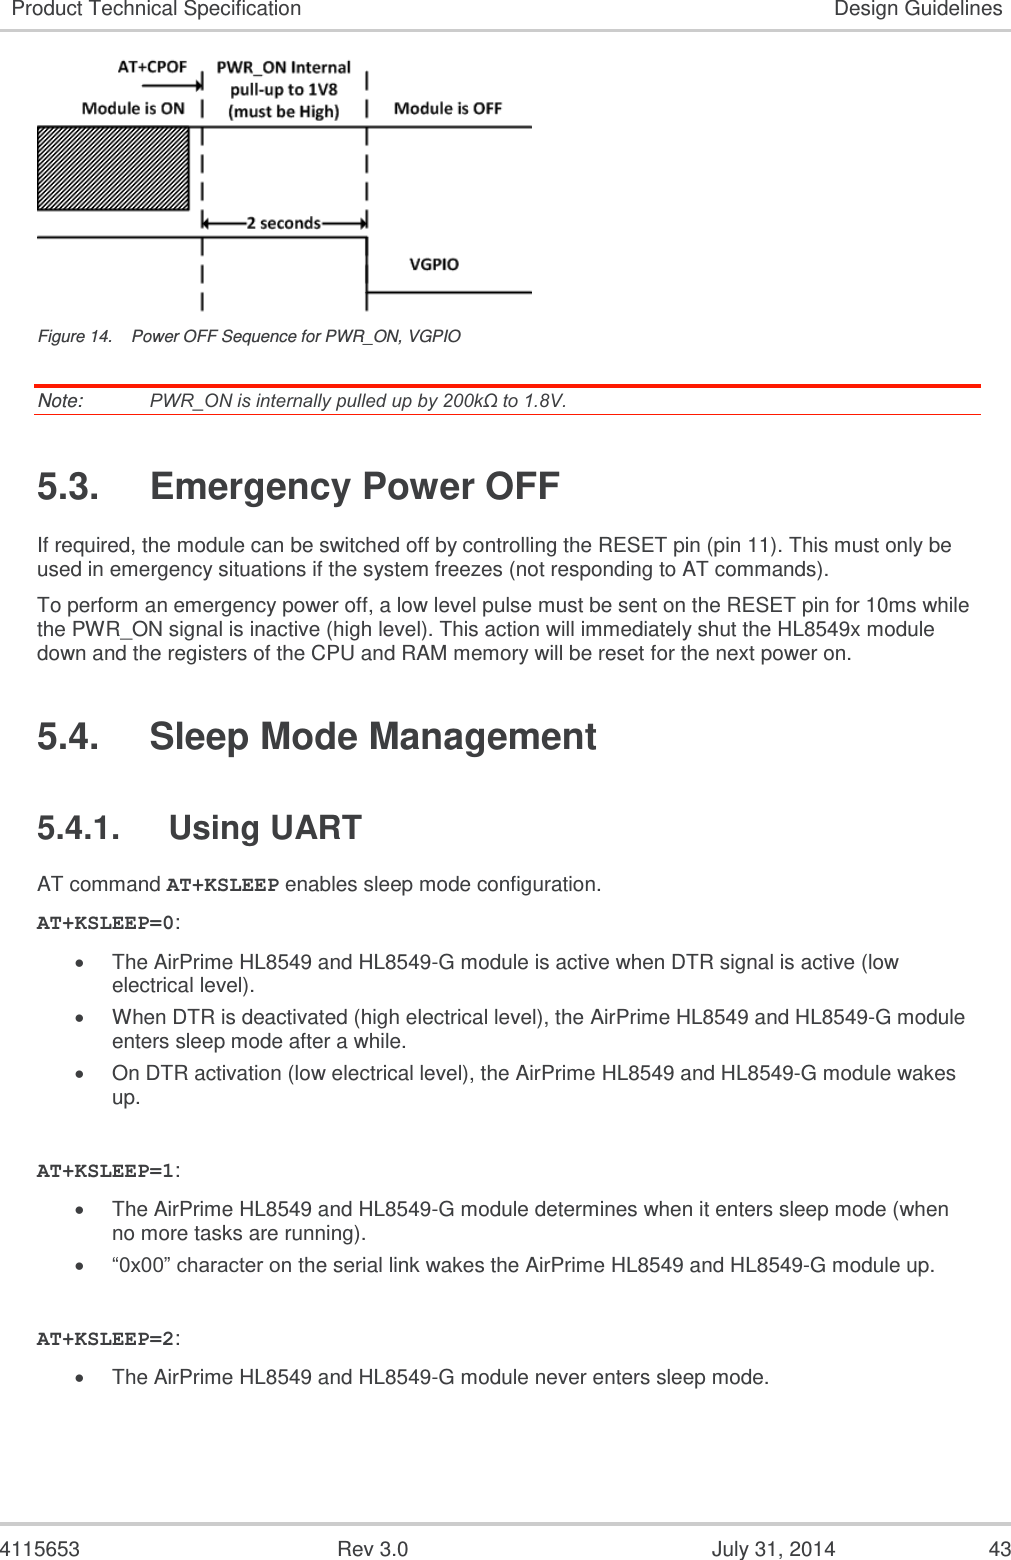  4115653  Rev 3.0  July 31, 2014  43 Product Technical Specification Design Guidelines  Figure 14.  Power OFF Sequence for PWR_ON, VGPIO Note:   PWR_ON is internally pulled up by 200kΩ to 1.8V. 5.3.  Emergency Power OFF If required, the module can be switched off by controlling the RESET pin (pin 11). This must only be used in emergency situations if the system freezes (not responding to AT commands). To perform an emergency power off, a low level pulse must be sent on the RESET pin for 10ms while the PWR_ON signal is inactive (high level). This action will immediately shut the HL8549x module down and the registers of the CPU and RAM memory will be reset for the next power on. 5.4.  Sleep Mode Management 5.4.1.  Using UART AT command AT+KSLEEP enables sleep mode configuration. AT+KSLEEP=0:  The AirPrime HL8549 and HL8549-G module is active when DTR signal is active (low electrical level).  When DTR is deactivated (high electrical level), the AirPrime HL8549 and HL8549-G module enters sleep mode after a while.  On DTR activation (low electrical level), the AirPrime HL8549 and HL8549-G module wakes up.  AT+KSLEEP=1:  The AirPrime HL8549 and HL8549-G module determines when it enters sleep mode (when no more tasks are running).  “0x00” character on the serial link wakes the AirPrime HL8549 and HL8549-G module up.  AT+KSLEEP=2:  The AirPrime HL8549 and HL8549-G module never enters sleep mode. 